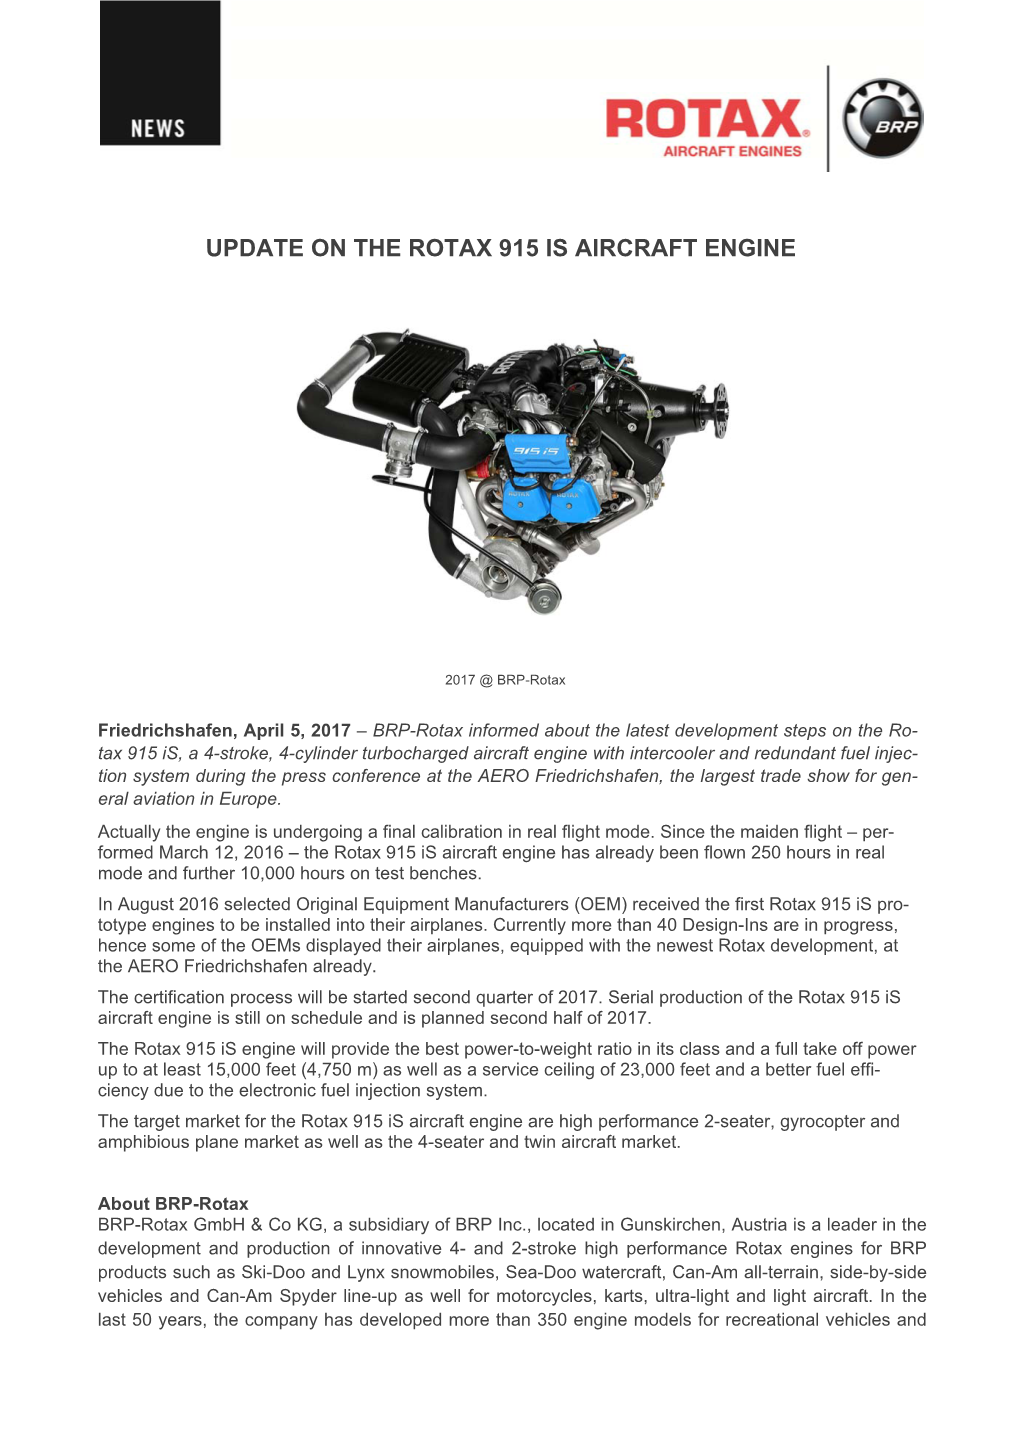 Update on the Rotax 915 Is Aircraft Engine